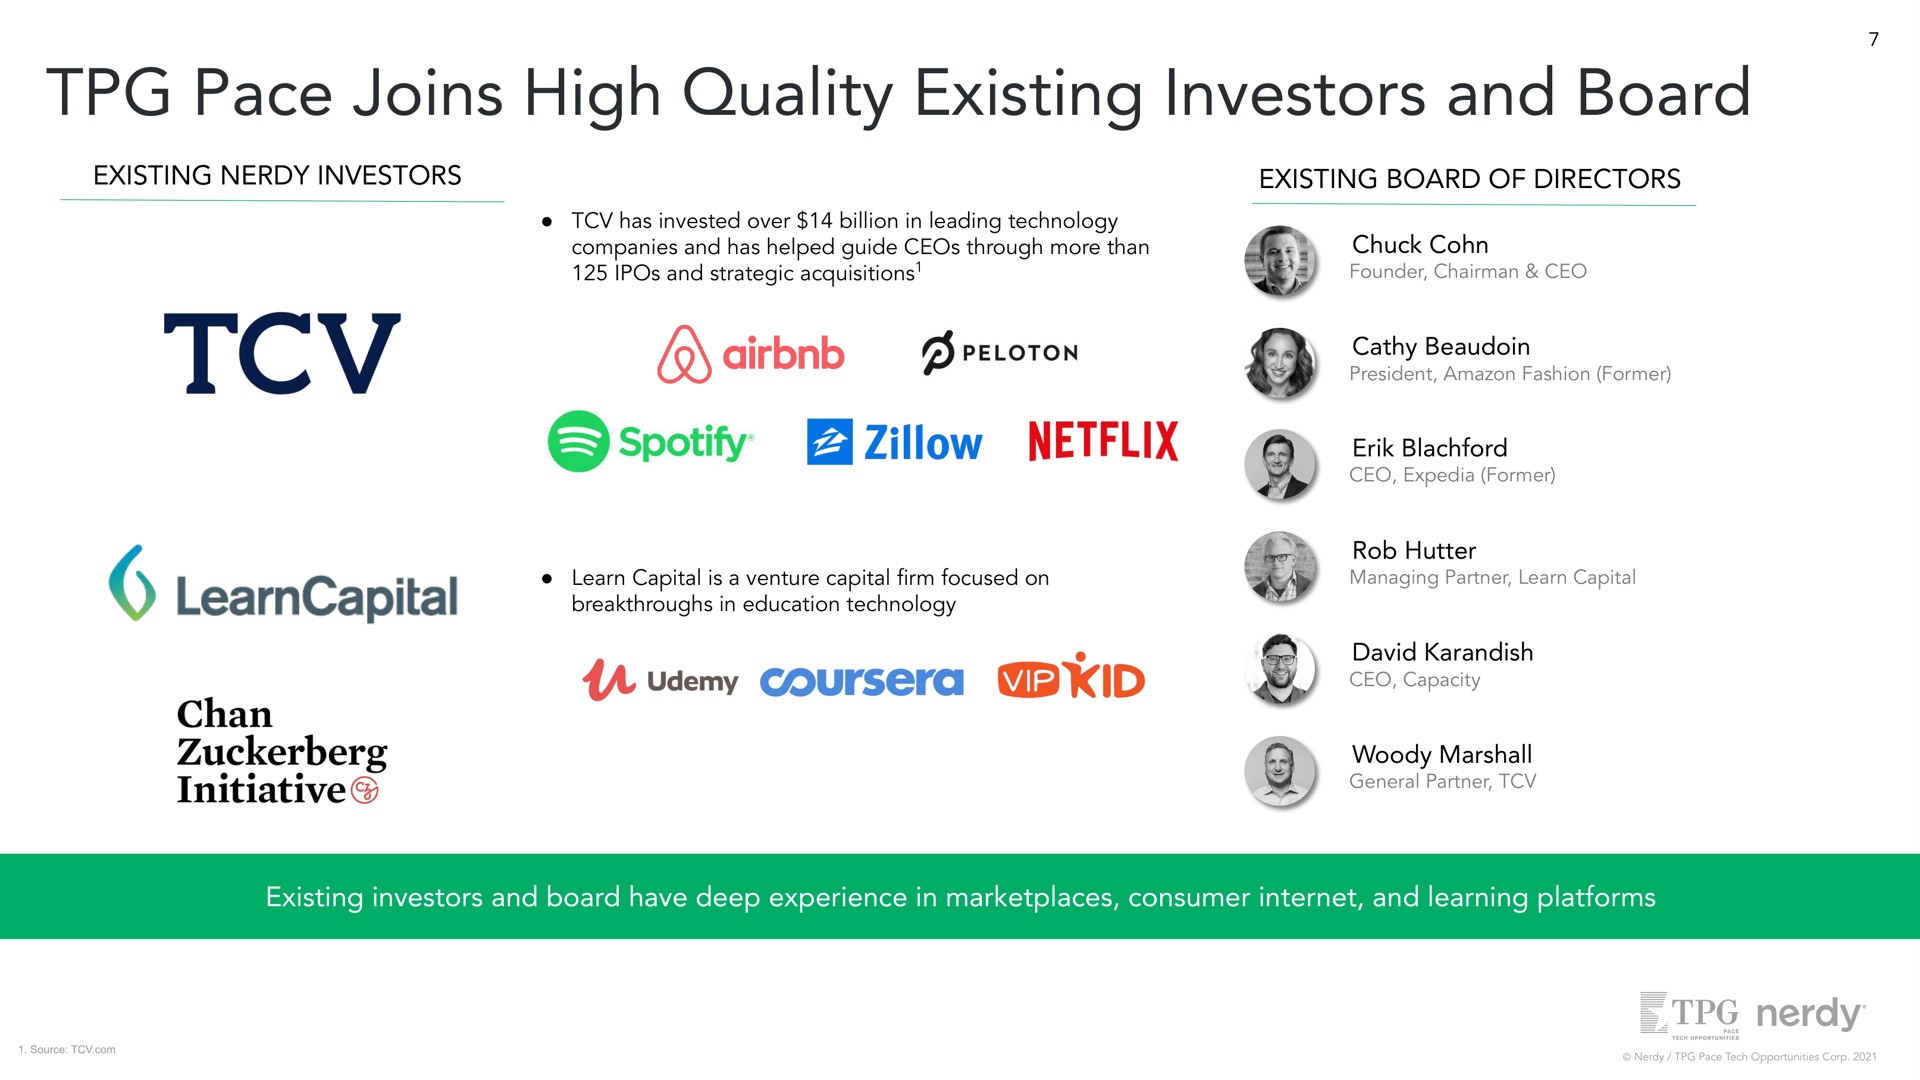 pace joins high quality existing investors and board existing investors existing board of directors has invested over billion in leading technology companies and has helped guide through more than and strategic acquisitions chuck learn capital is a venture capital focused on breakthroughs in education technology rob woody existing investors and board have deep experience in consumer and learning platforms mes | Nerdy